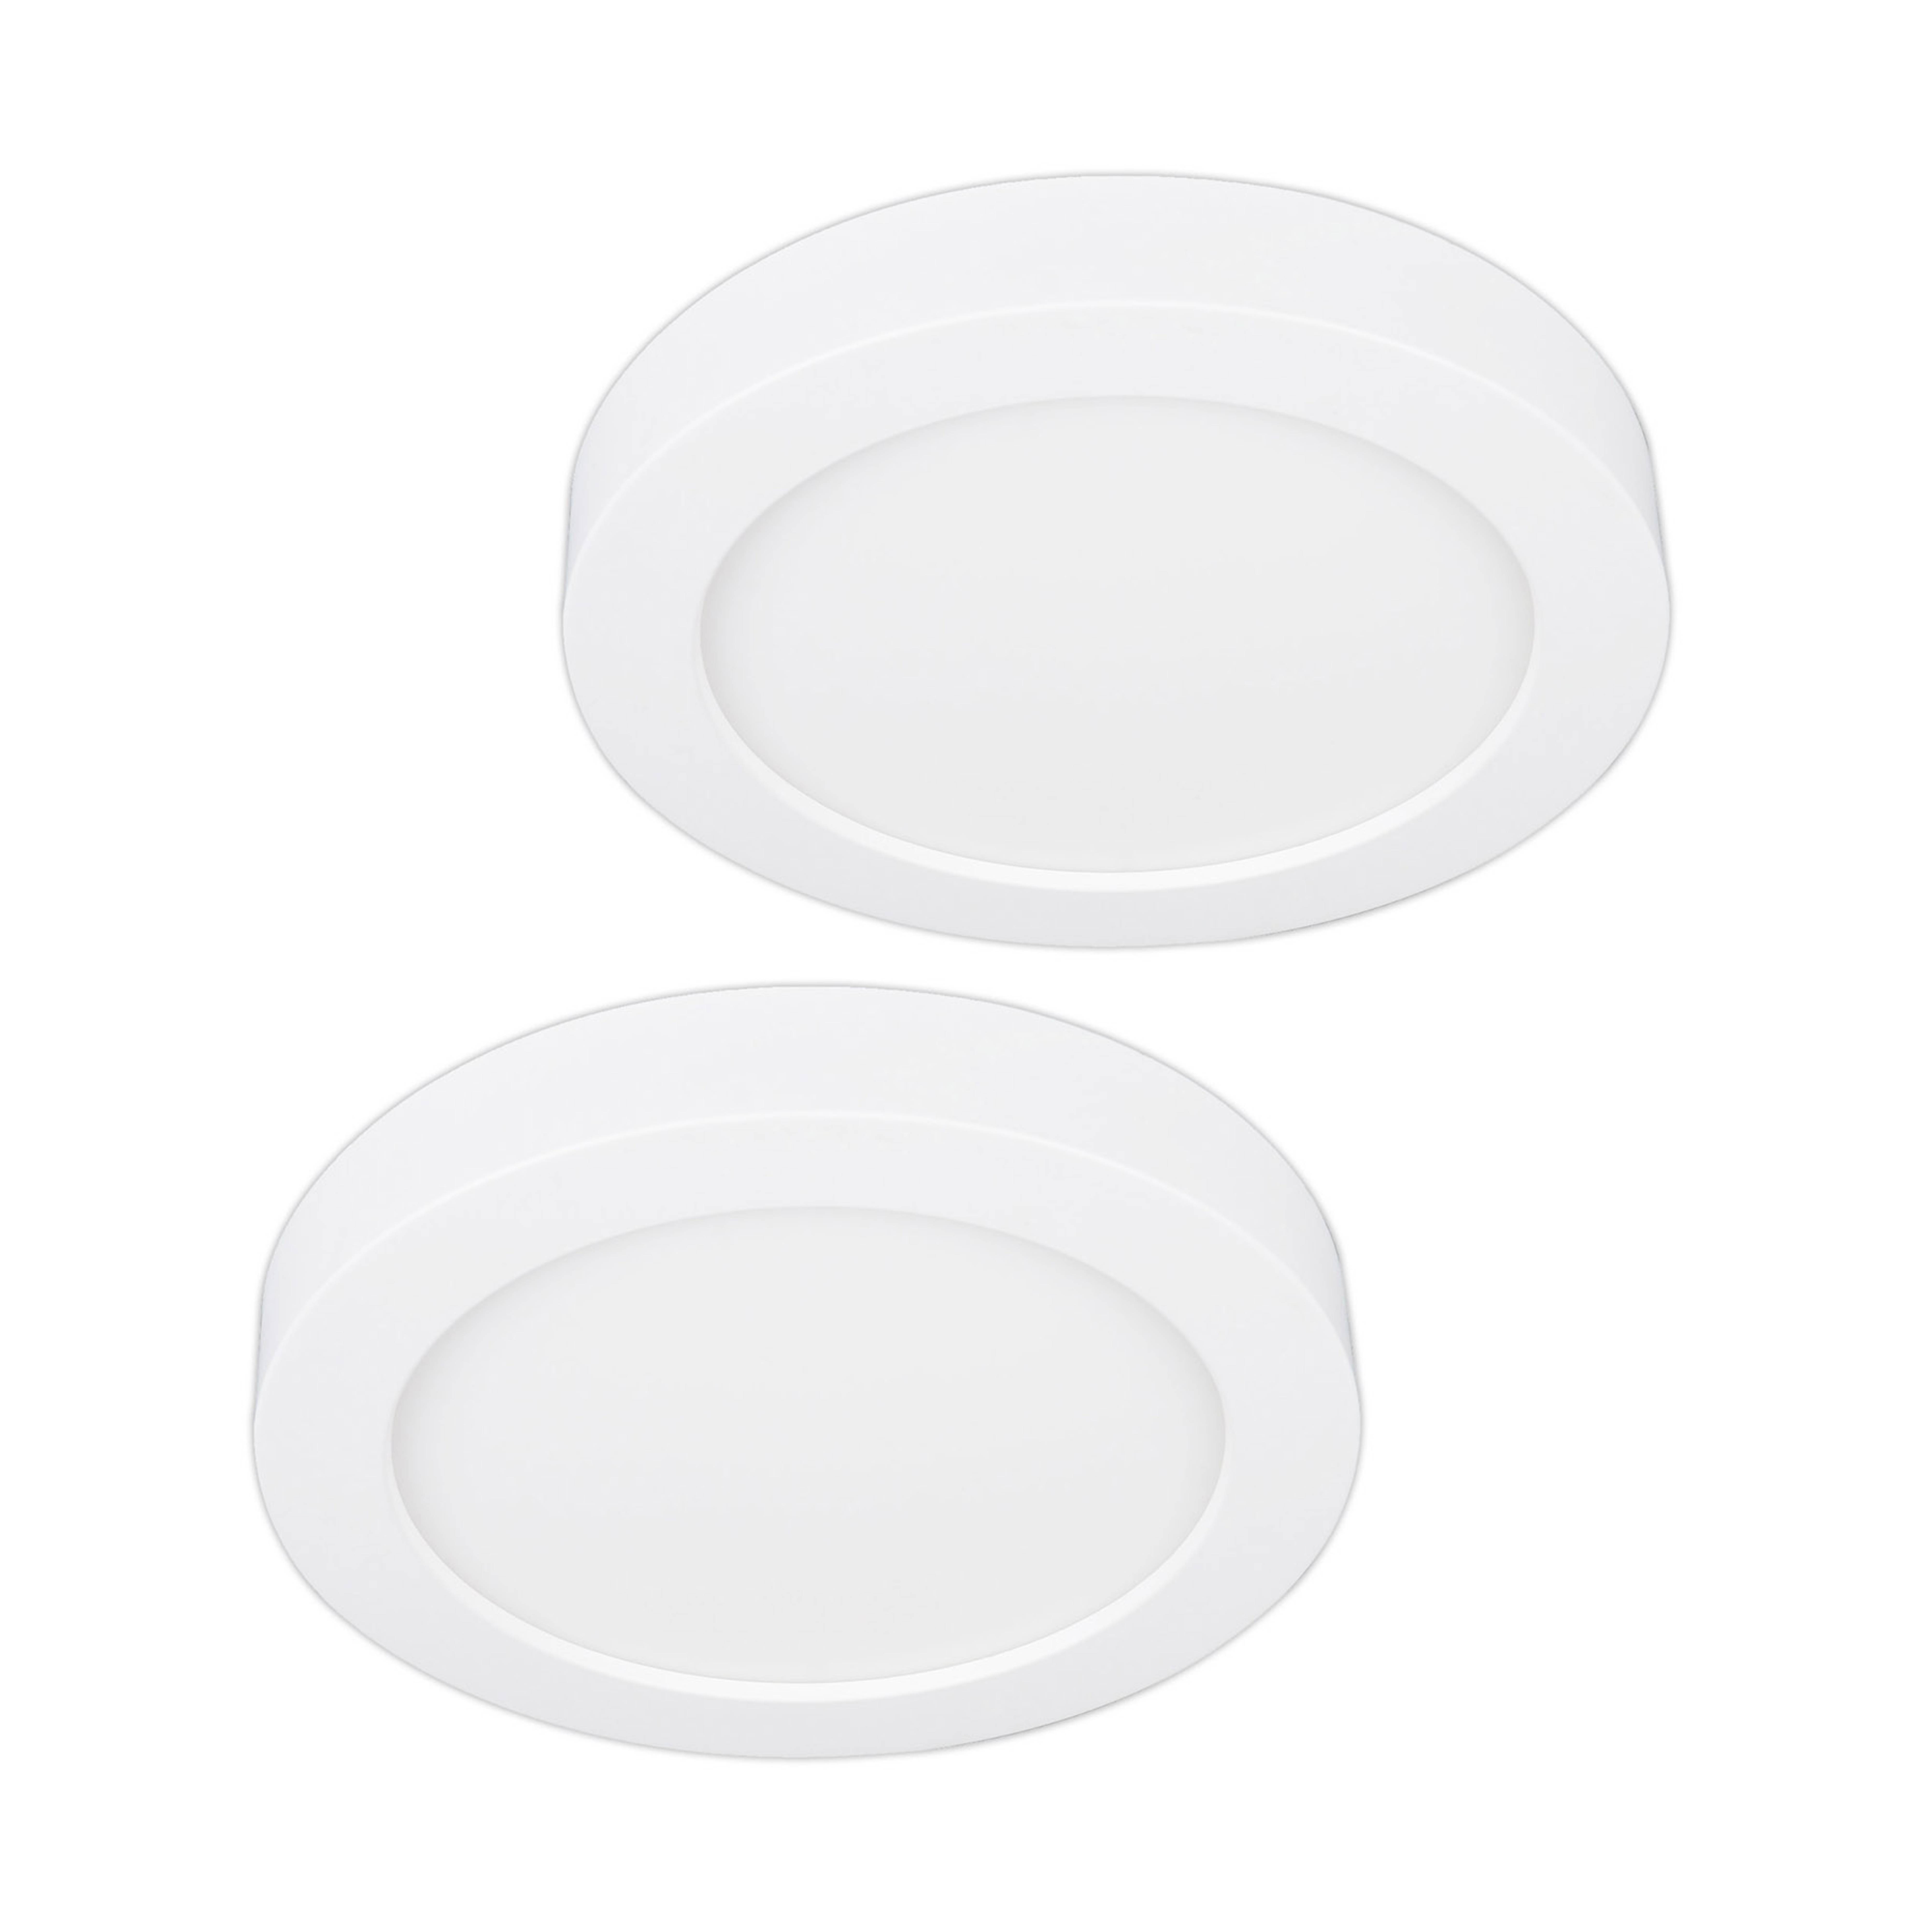 Prios LED ceiling lamp Edwina, white, 22.6cm, 2pcs, dimmable